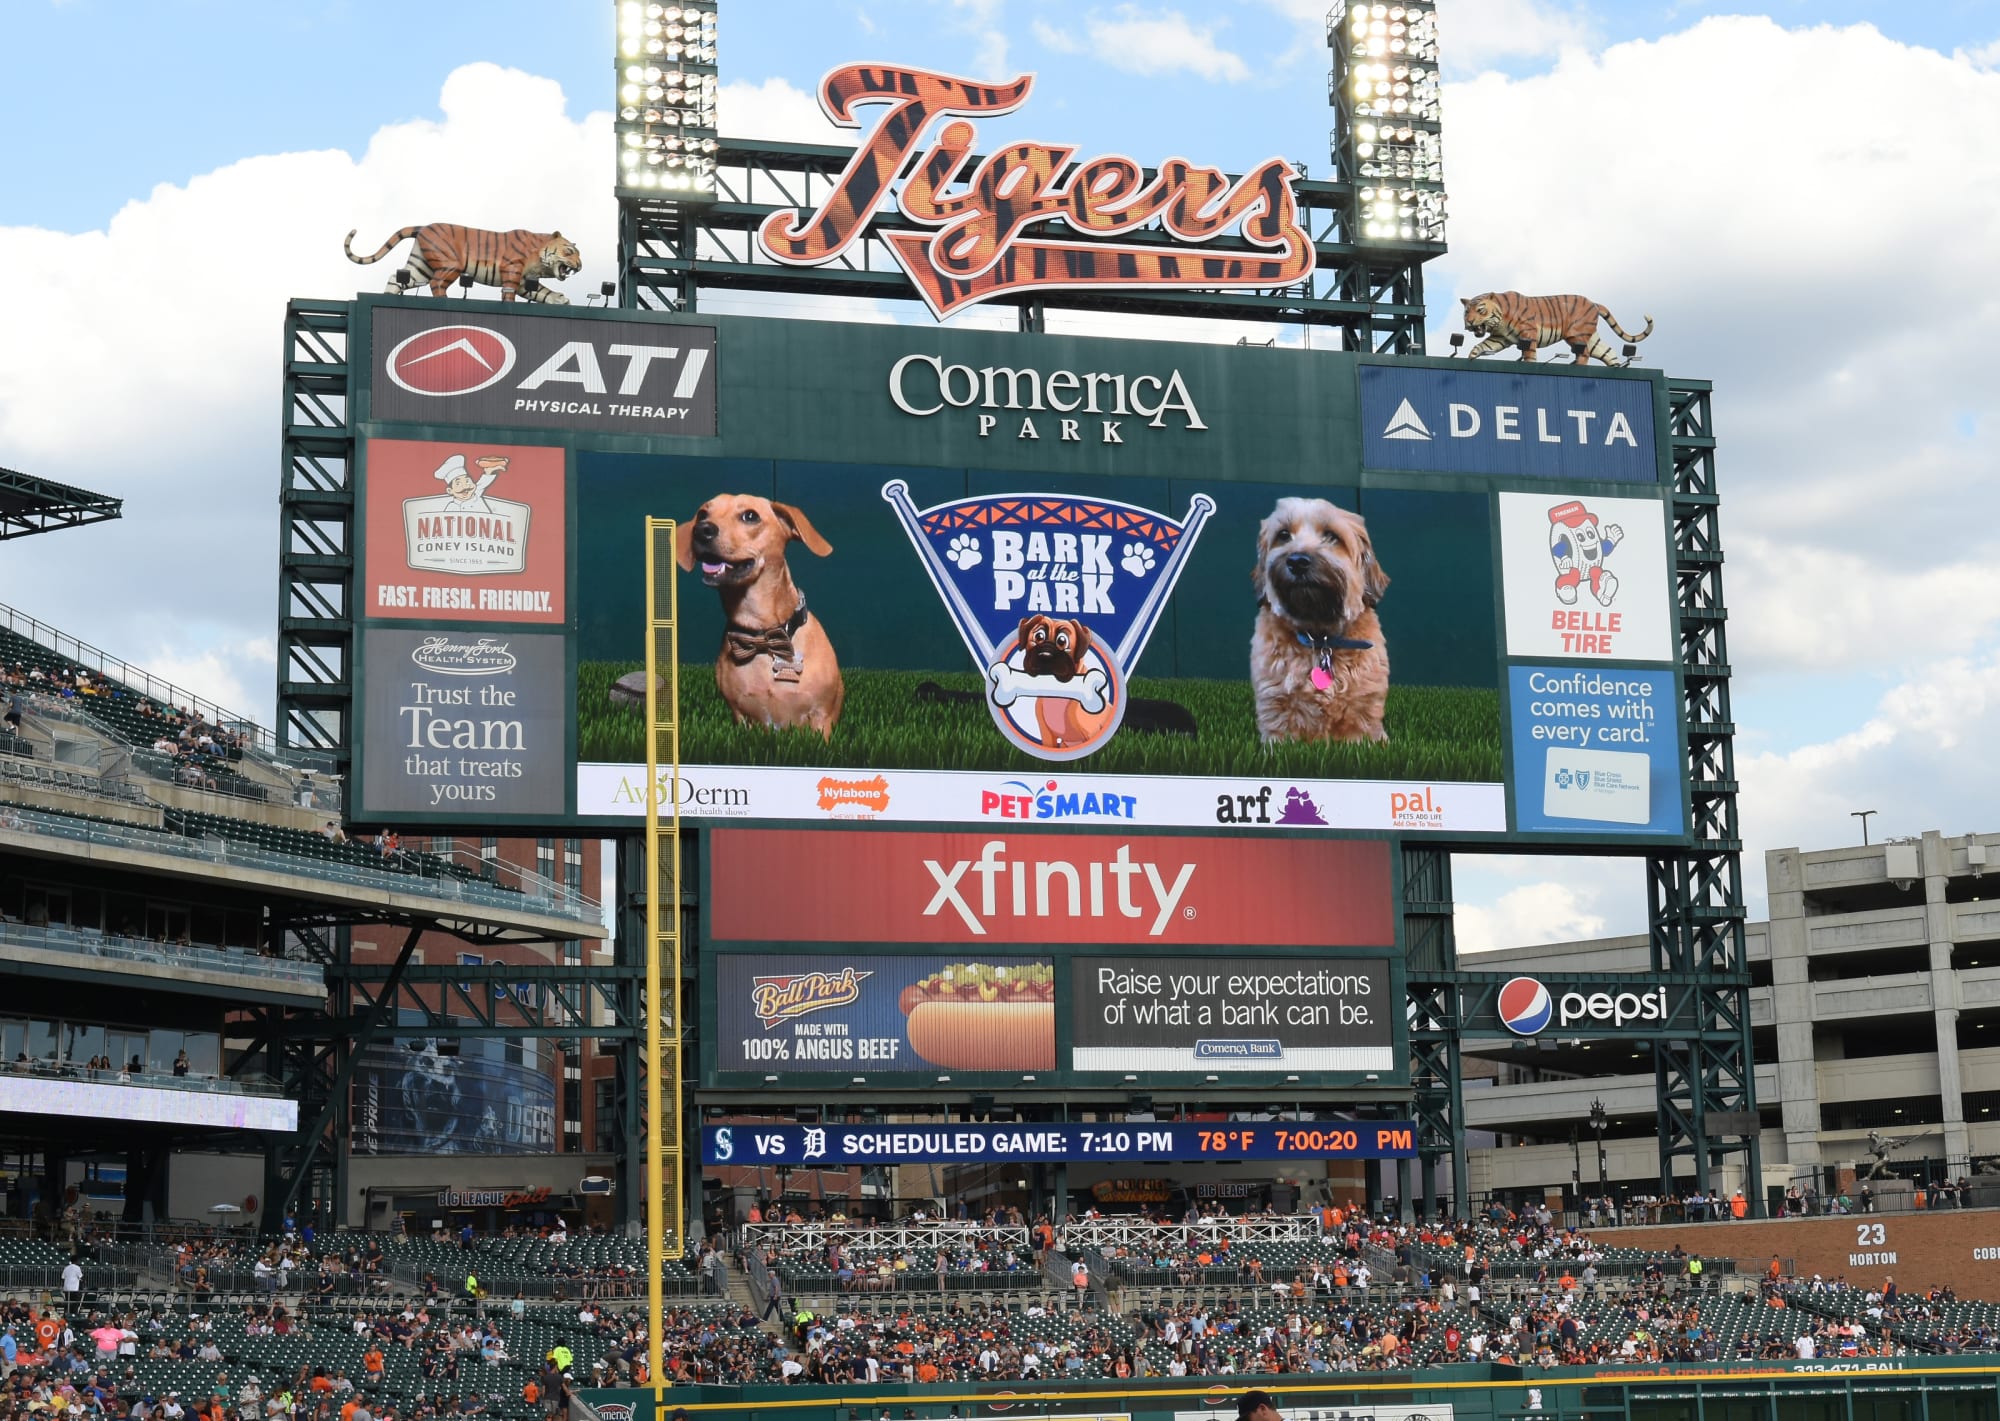 A Detroit Tigers History Story For "Bark In The Park" Day